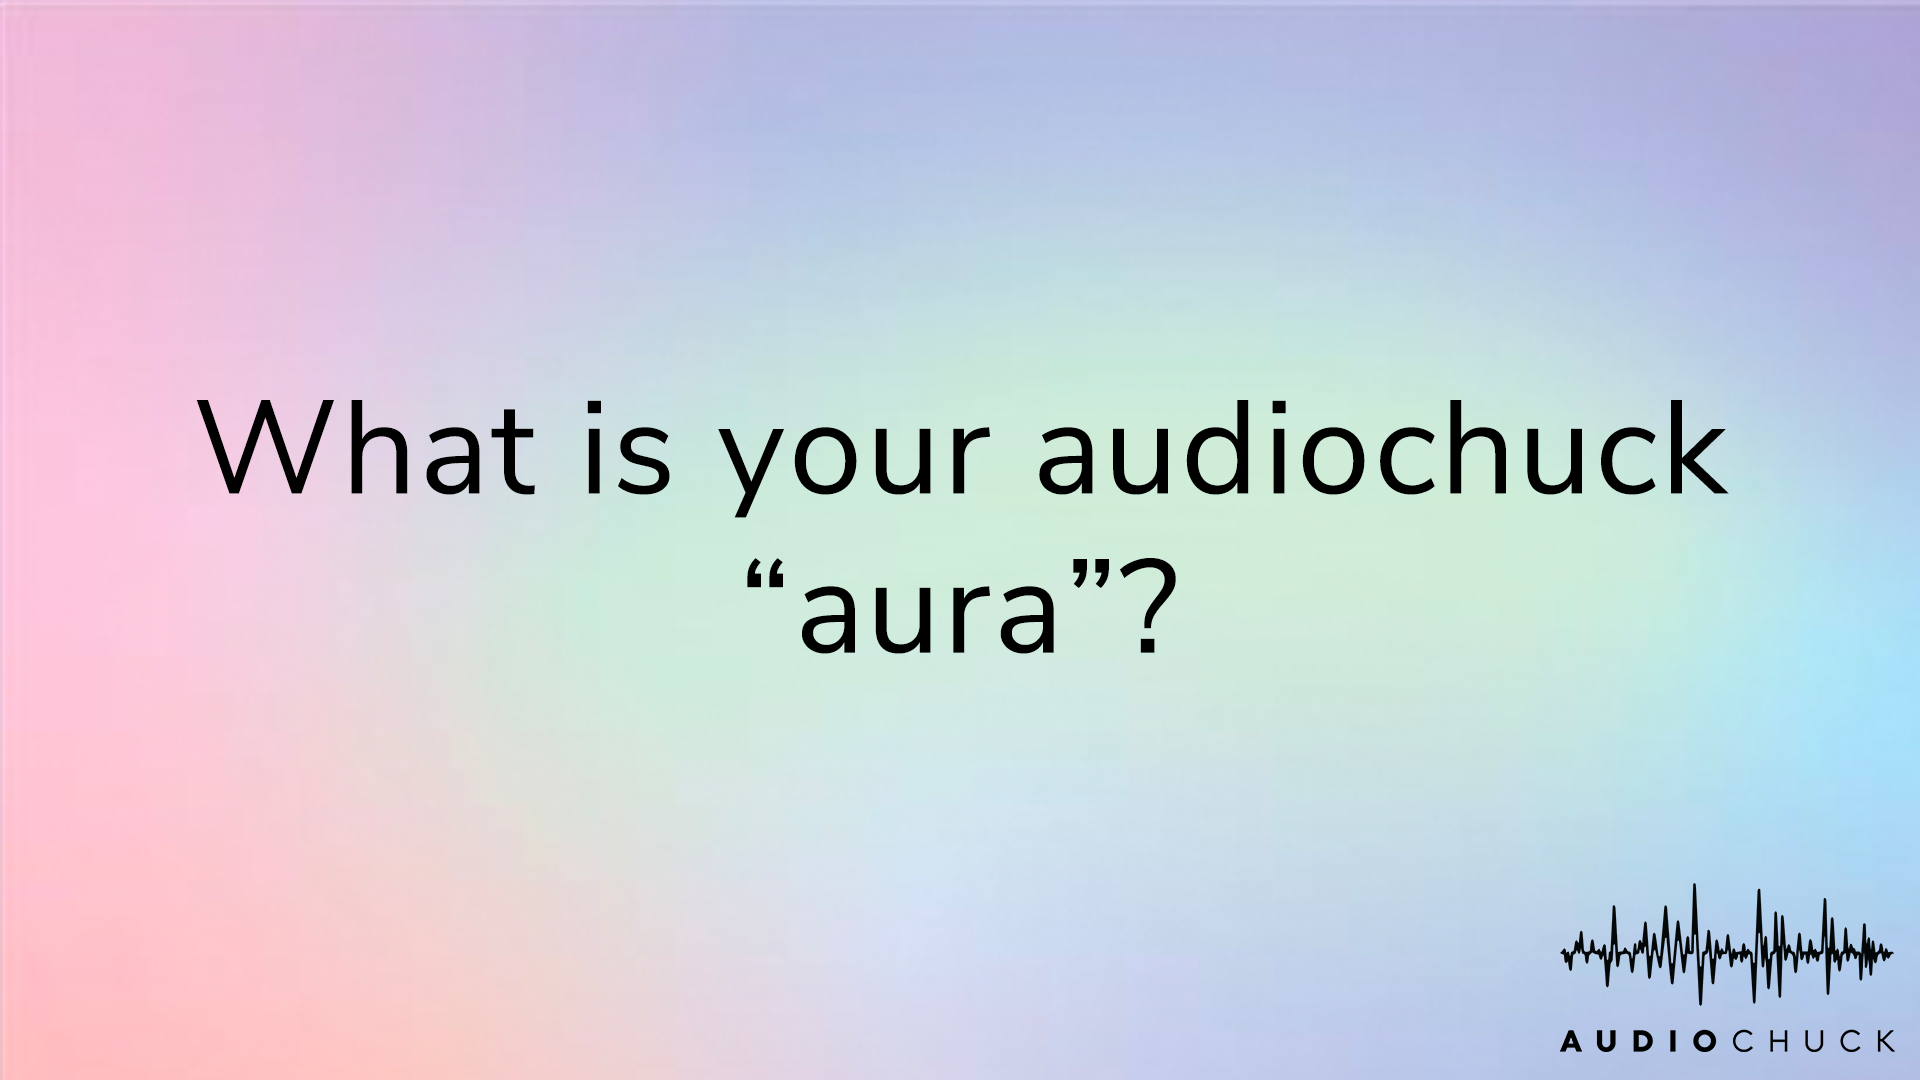 What is your audiochuck "aura"?